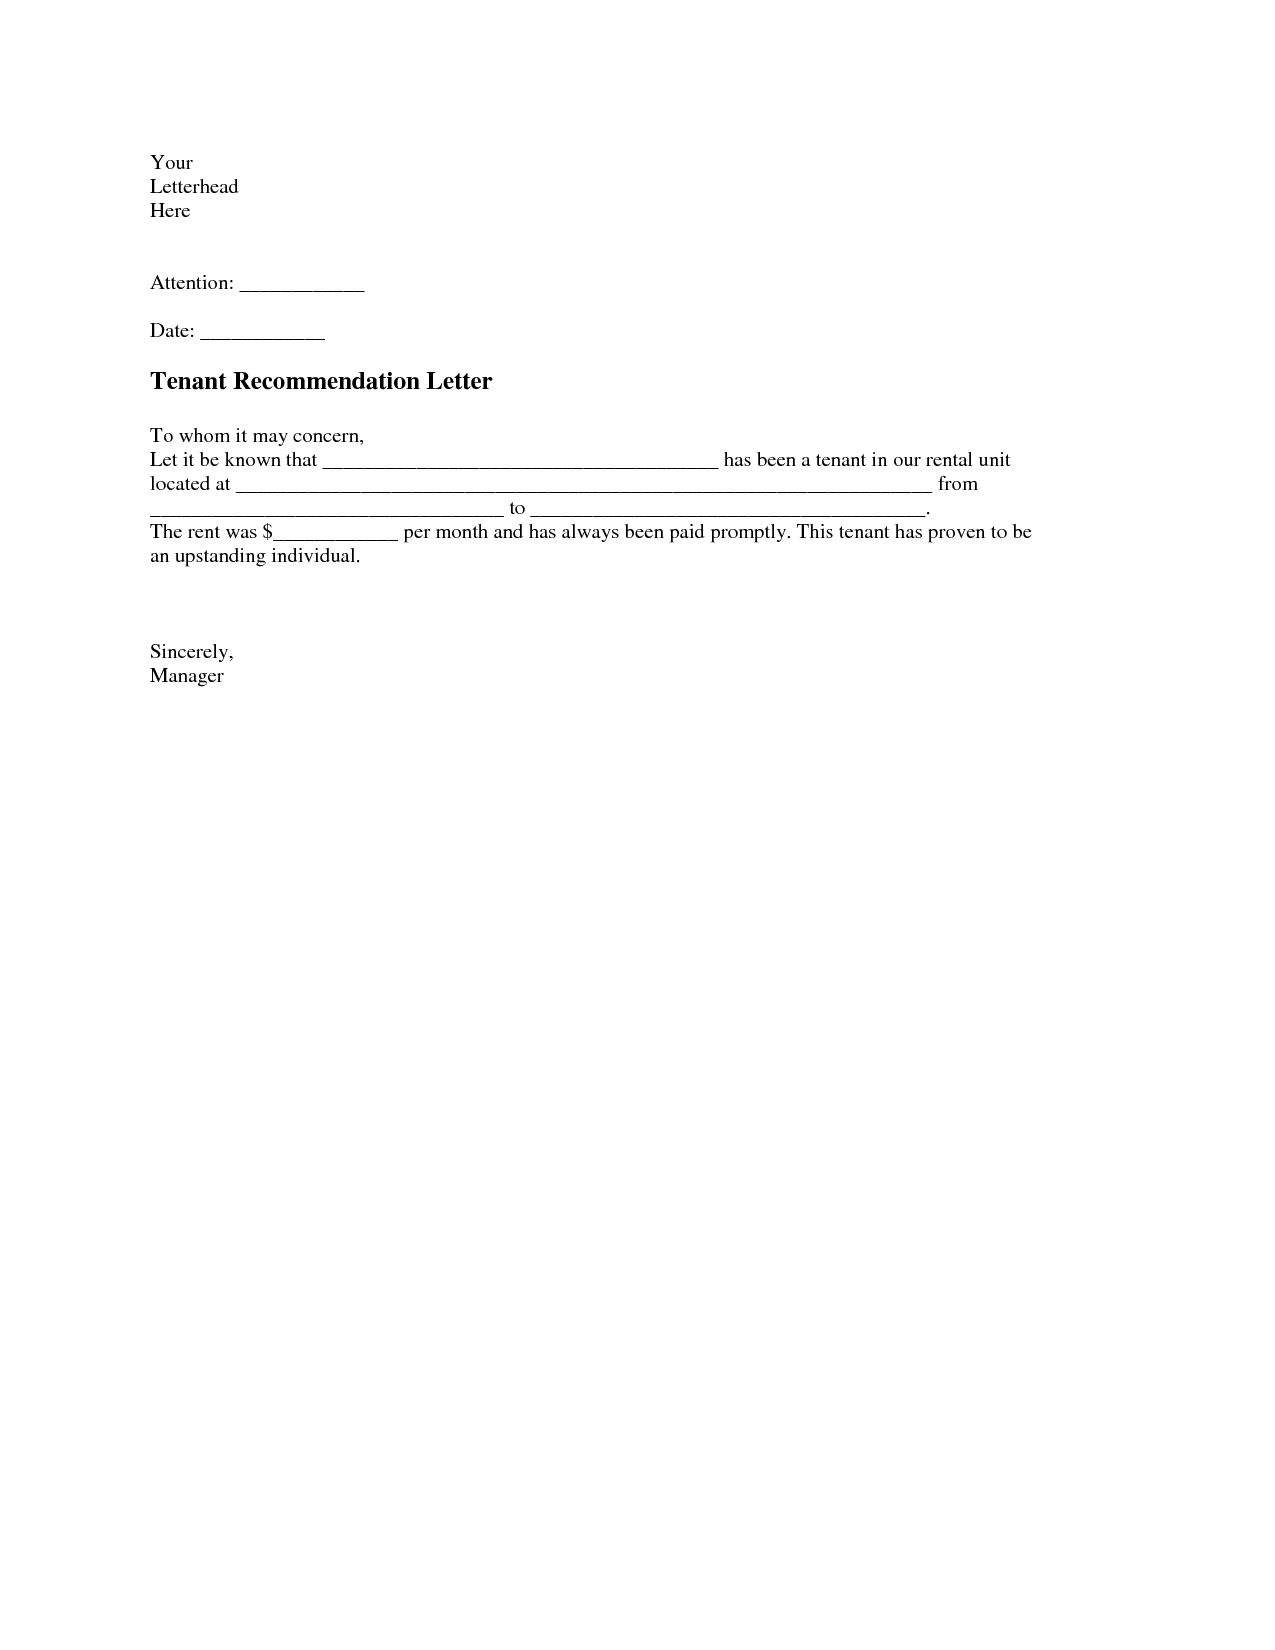 Letter Of Recommendation For Tenant From Employer Akali within proportions 1275 X 1650